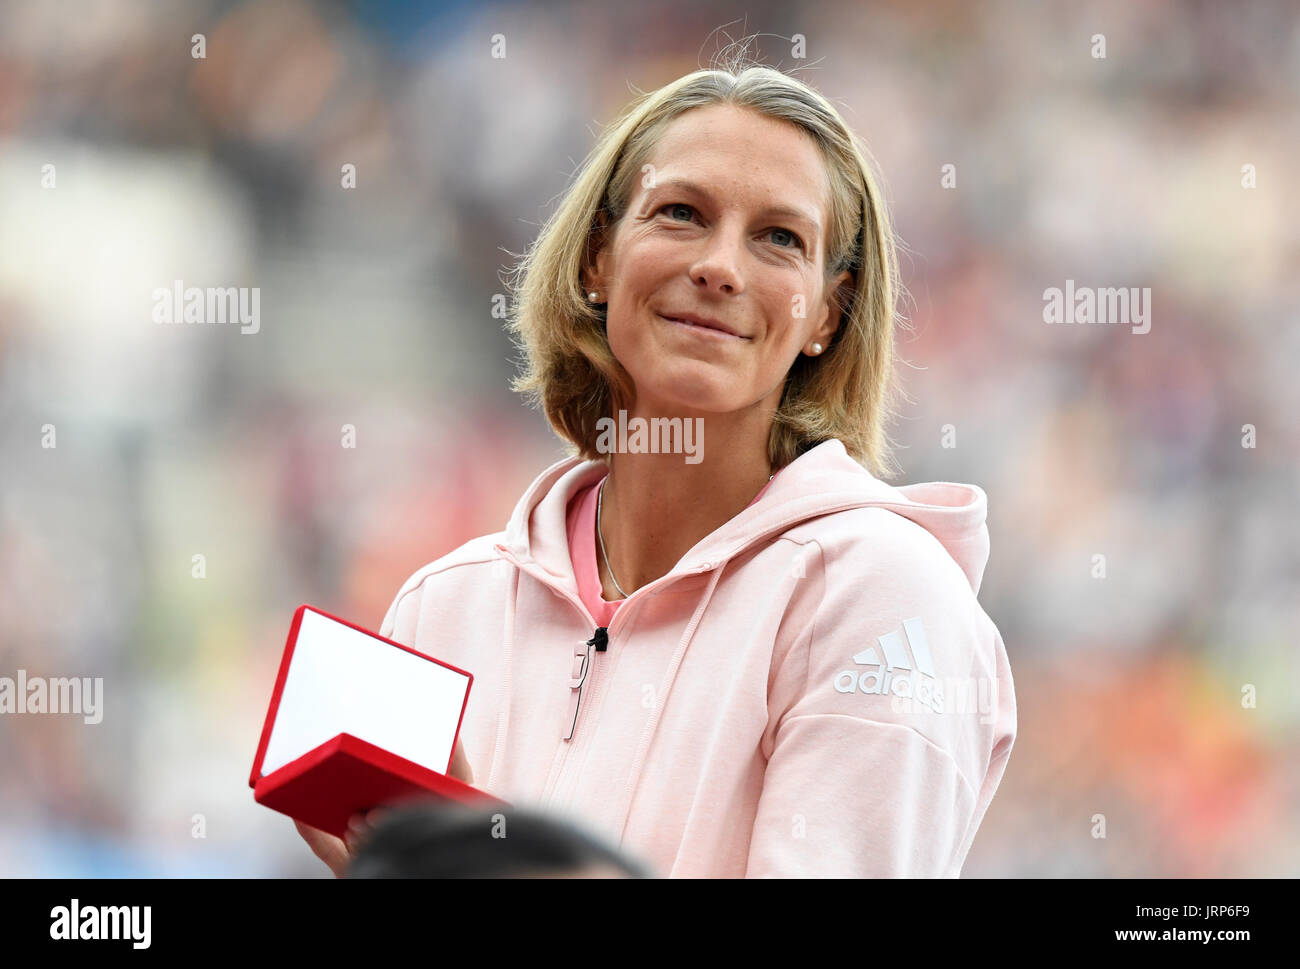 London, UK. 6th Aug, 2017. Former heptathlete Jennifer Oeser of Germany belatedly receives her silver medal in the heptathlon of 2011 at the IAAF World Championships at the Olympic Stadium in Athletics in London, UK, 6 August 2017. Oeser moved fromthird to second place after then-champion Tatyana Chernova of Russia was disqualified for doping. Photo: Rainer Jensen/dpa/Alamy Live News Stock Photo